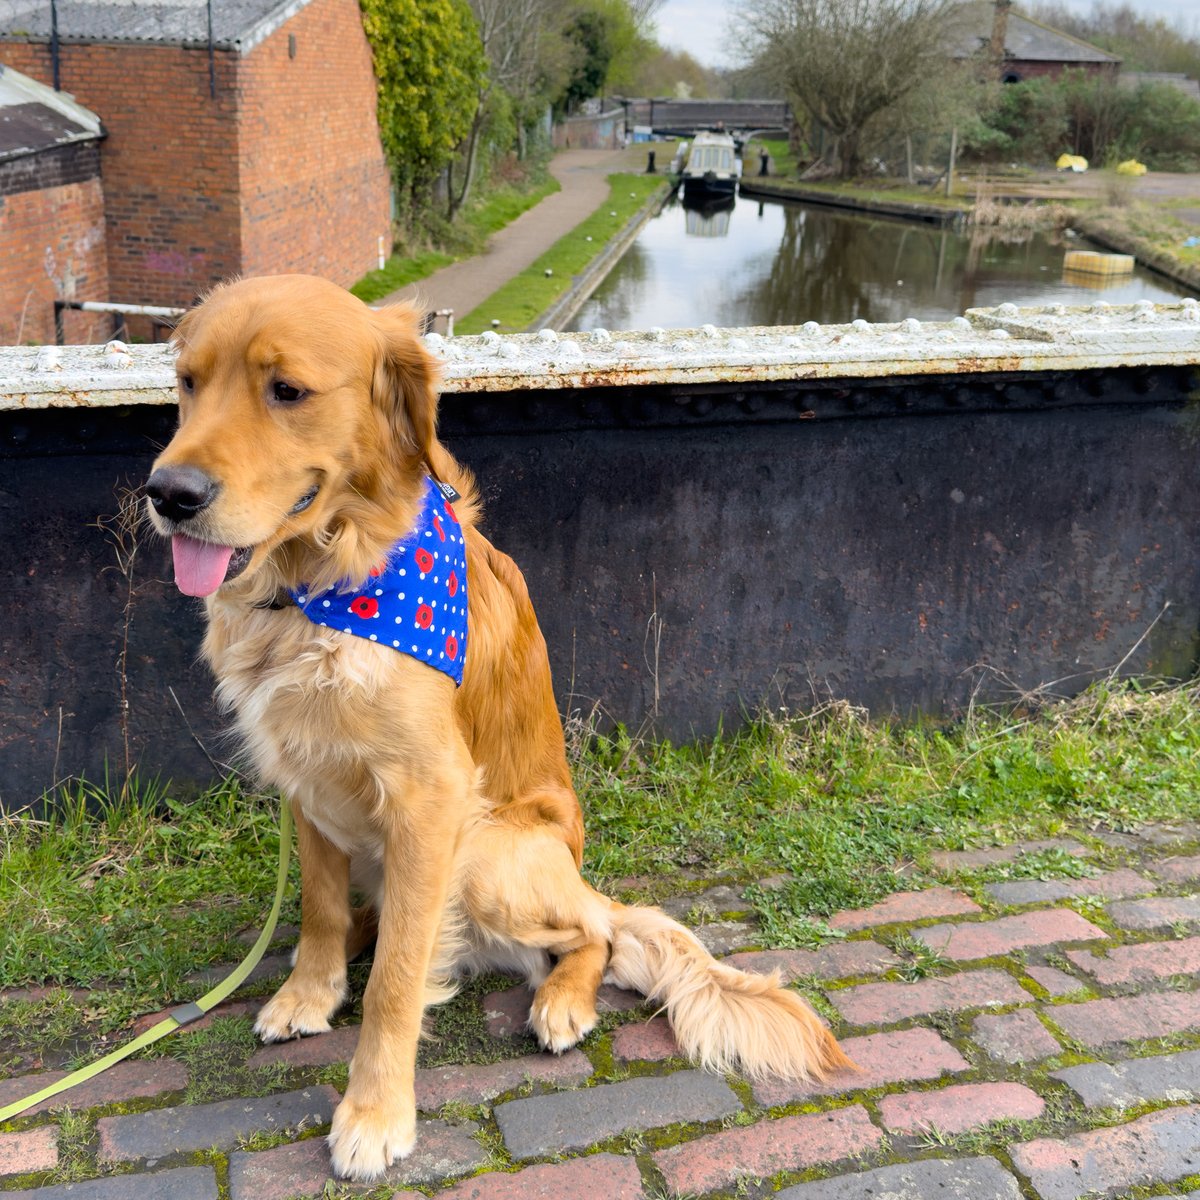 Todays #TongueOutTuesday on the #BirminghamCanals at #FactoryBridge watching the #narrowboats at #FactoryLocks #BoatsThatTweet #LifesBetterByWater #KeepCanalsAlive #RedMoonshine #TiptonCanals #GoldenRetrievers #PoppyAppeal moonshine.red